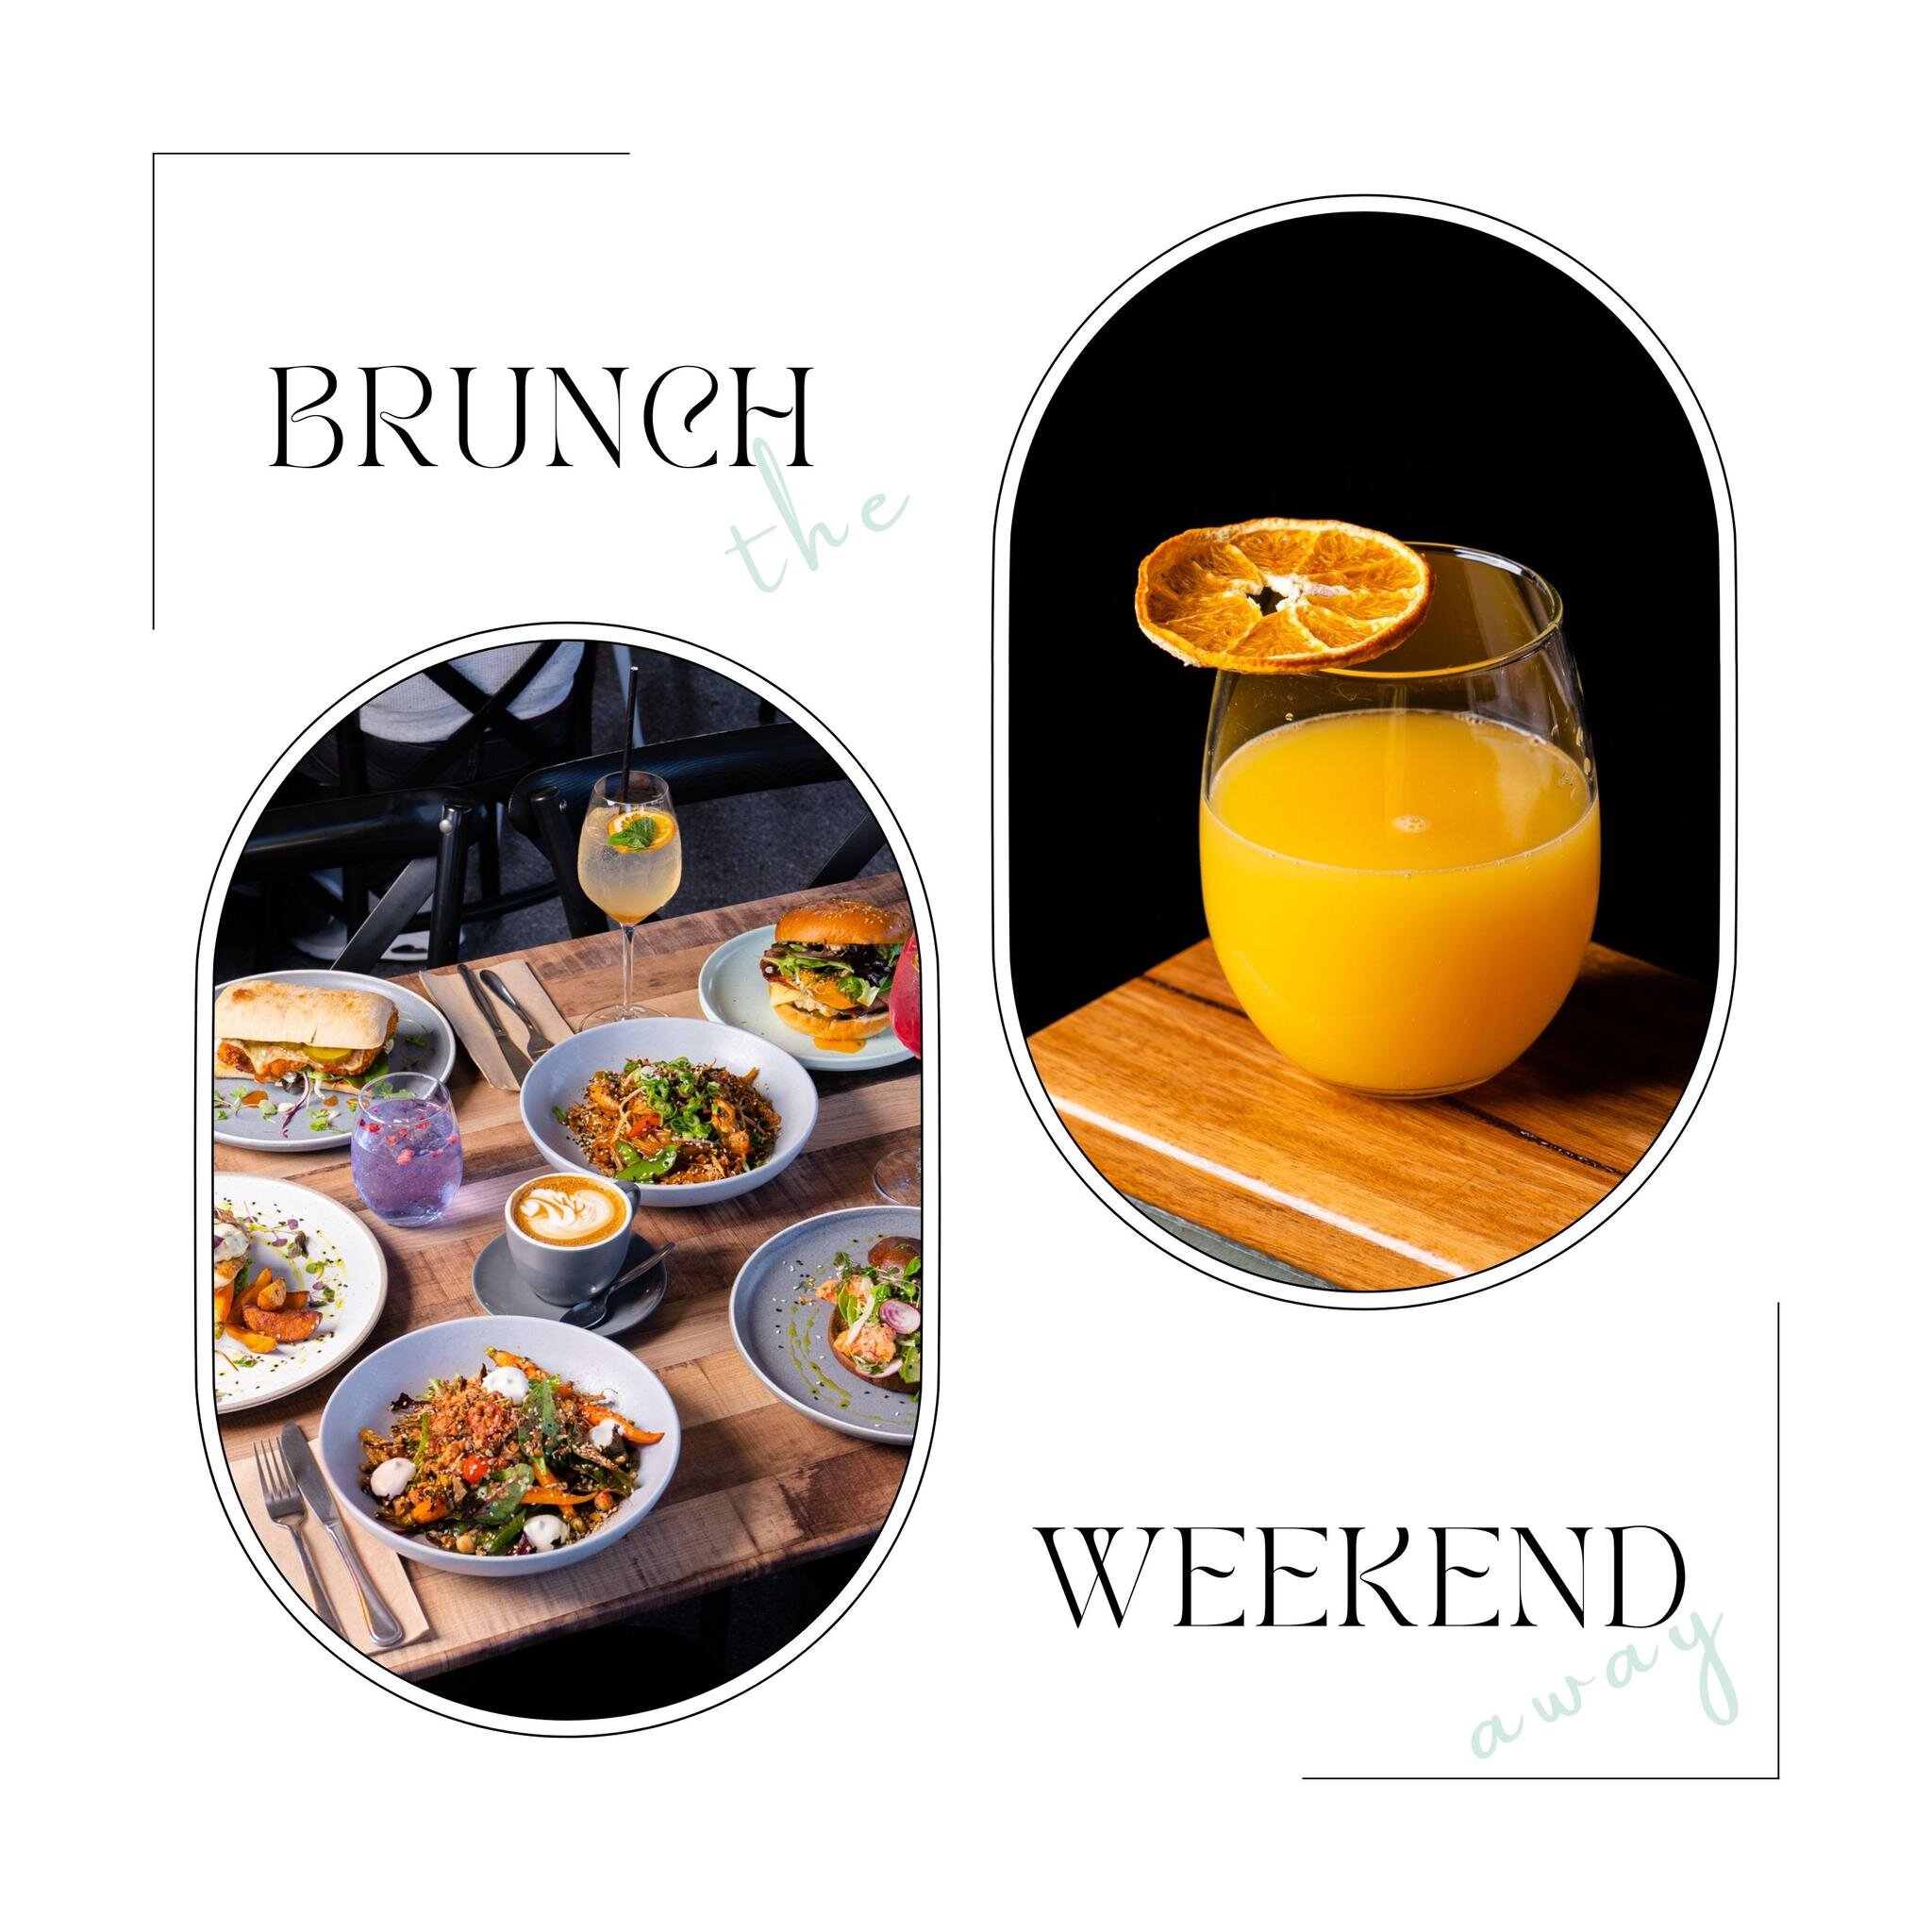 Happy weekend! Are you brunching with us today?